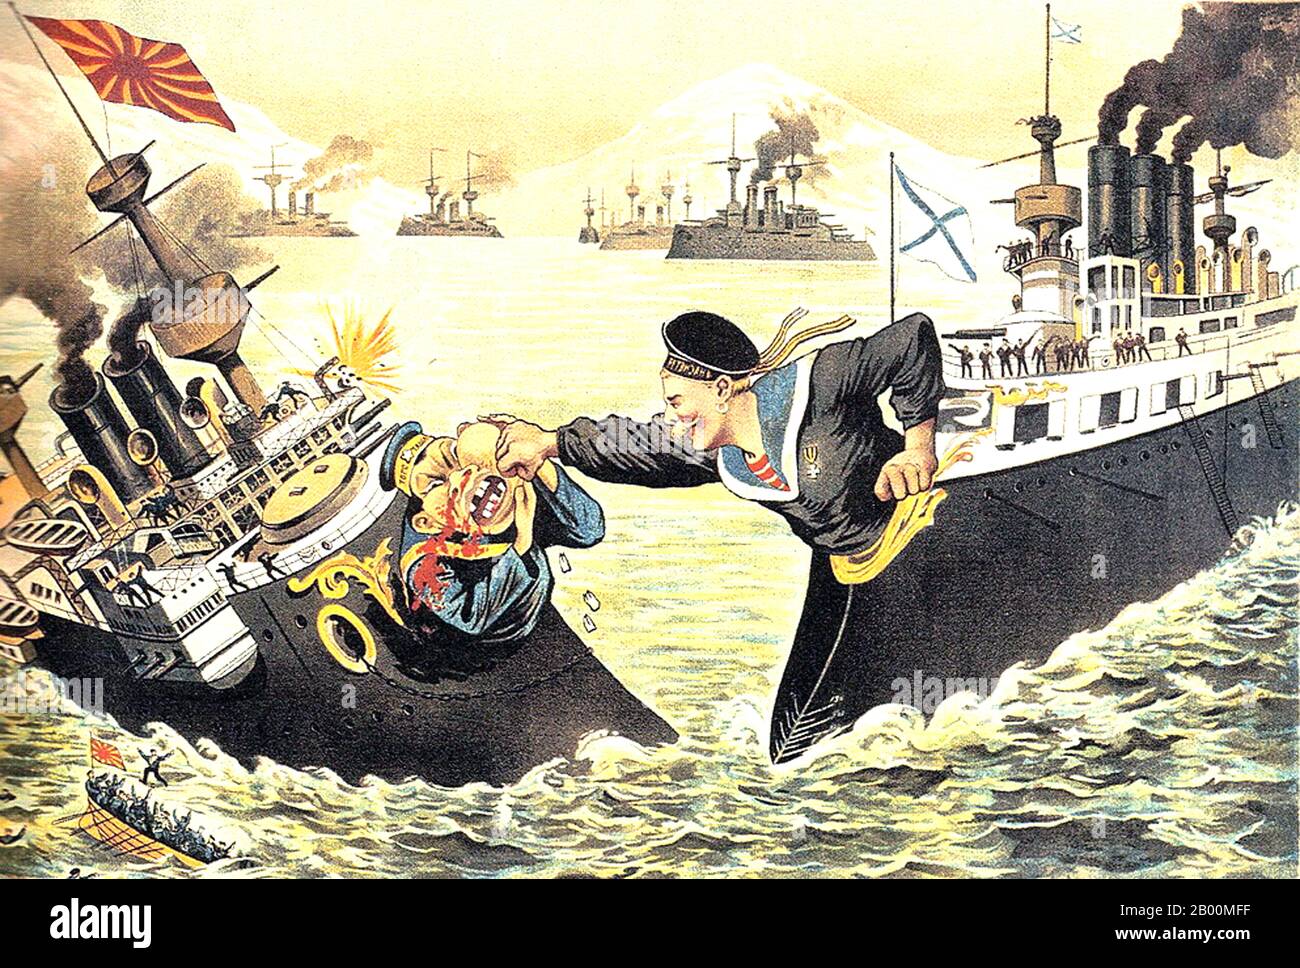 Russia: Russian propaganda image of Tsarist navy giving Japanese navy a bloody nose, (Russo-Japanese War, 8 February 1904 – 5 September 1905).  The Russo-Japanese War (8 February 1904 – 5 September 1905) was the first great war of the 20th century which grew out of the rival imperial ambitions of the Russian Empire and Japanese Empire over Manchuria and Korea. The resulting campaigns, in which the Japanese military attained victory over the Russian forces arrayed against them, were unexpected by world observers. Stock Photo